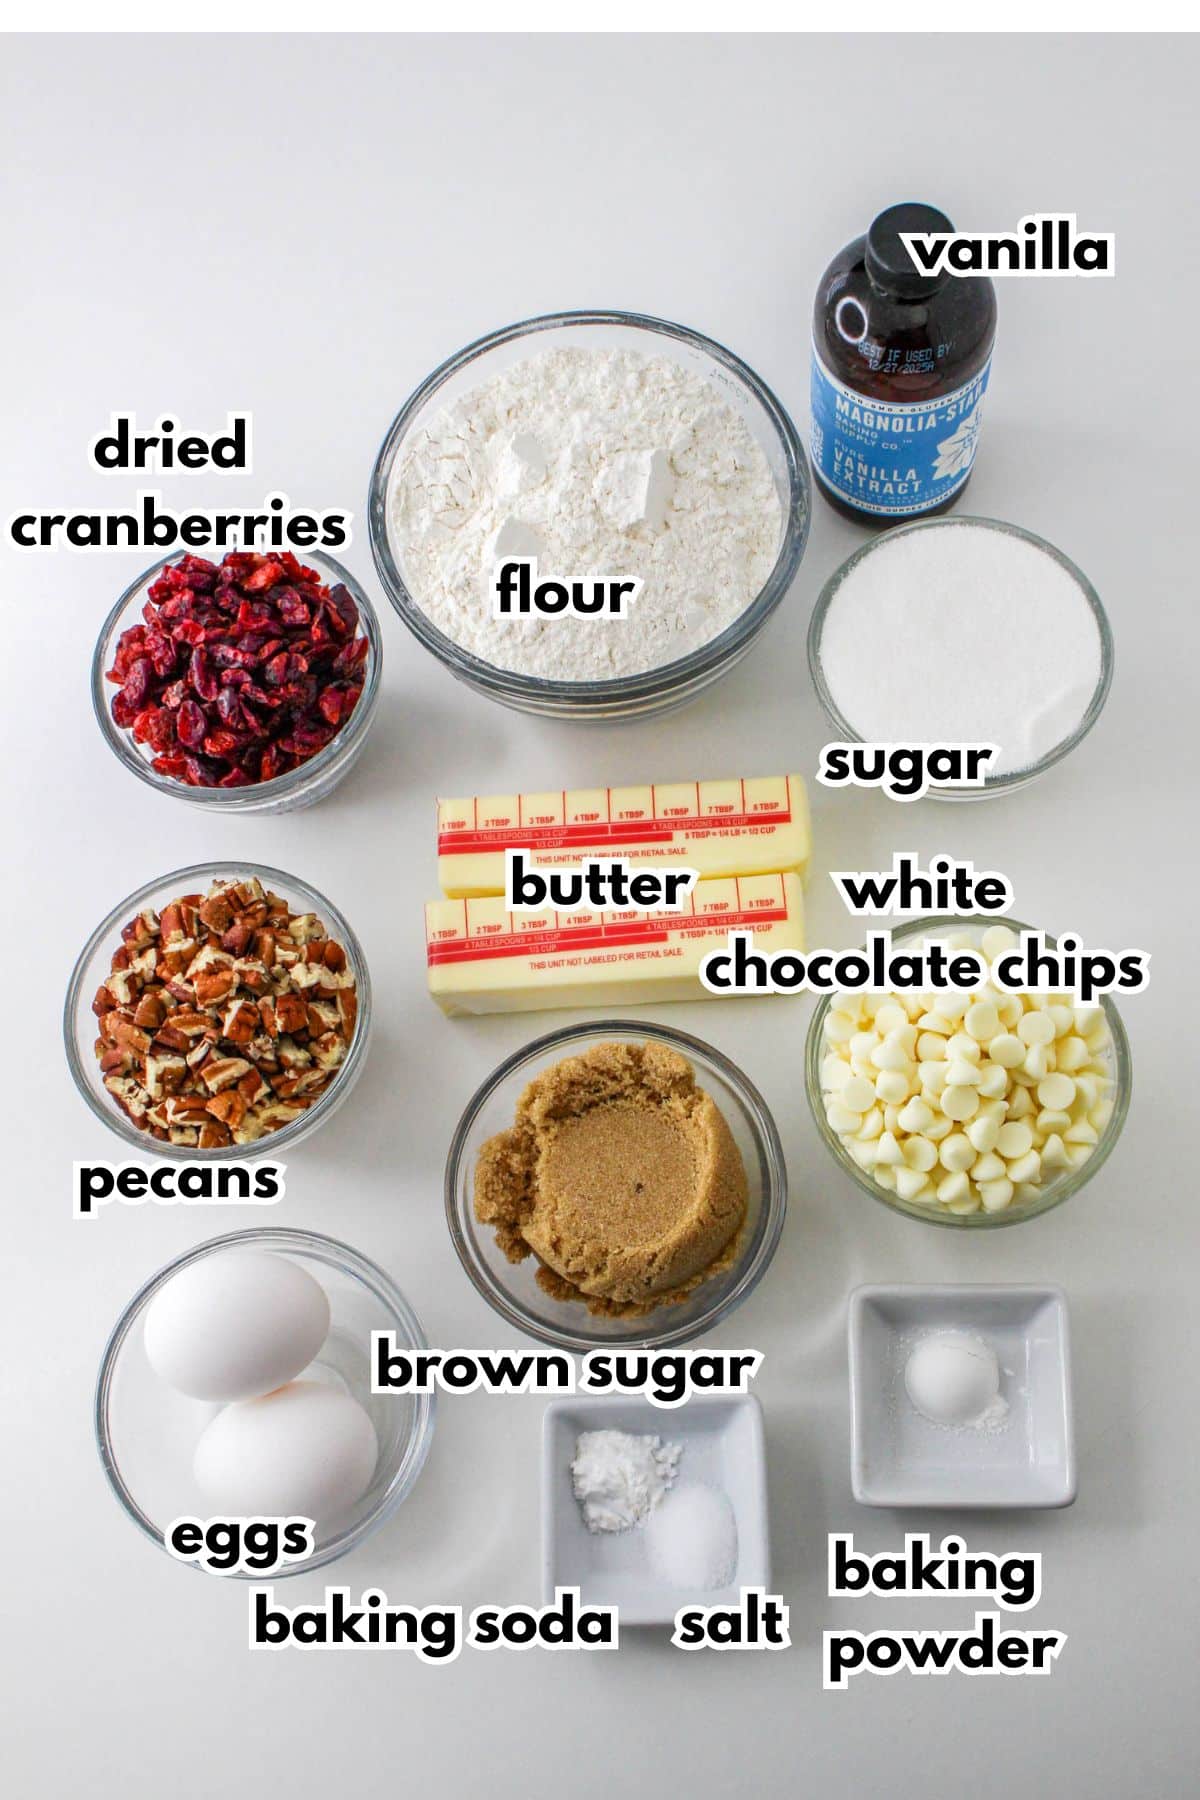 bowls of vanilla extract, flour, dried cranberries, pecans, butter, sugar, brown sugar, eggs, white chocolate chips, baking soda, baking powder, and salt.